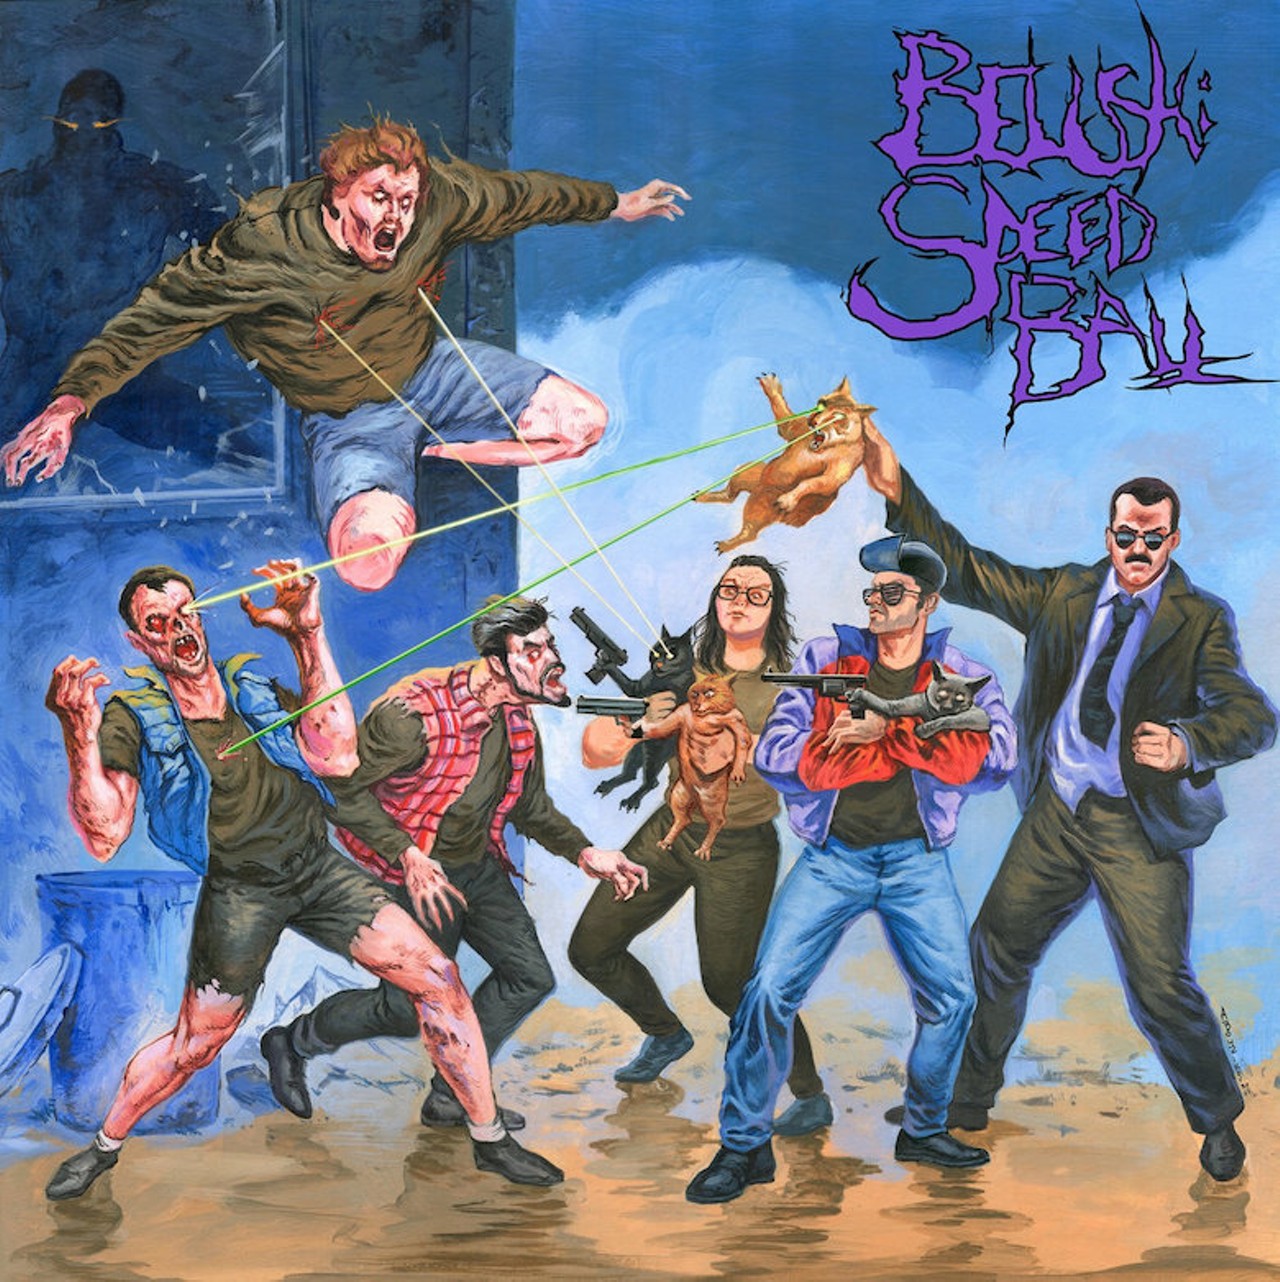 Belushi Speed Ball
We Aren&#146;t Thrashers, We Are Hipster Posers 
On &#147;We Aren&#146;t Thrashers, We Are Hipster Posers,&#148; local legends Belushi Speed Ball deliver yet another glorious thrash anthem. This song was inspired by a discouraging YouTube comment received by the band that claimed they should dress like &#147;real thrashers,&#148; instead of &#147;hipster posers.&#148; In the best ways possible, this song only adds to the difficulty one could experience when attempting to explain what exactly Belushi Speed Ball is to someone who has never heard of them before. This is because of the song&#146;s inside joke quality and the genius shift from thrash metal to unabashed emo-pop in the last third of the song. Setting aside the song&#146;s devilish riffs, calculated rhythm and comedic tone, it&#146;s quite beautiful to hear these sponge-core goofballs take this negativity and use it to take aim at hurtful gatekeeping practices in the metal community. &#147;We&#146;re Not Thrashers&#133;&#148; has made for a great addition to the group&#146;s stellar and unique live performances, often prompting a unifying, lighter-waving singalong. &#151;Doug Campbell
Listen on Bandcamp